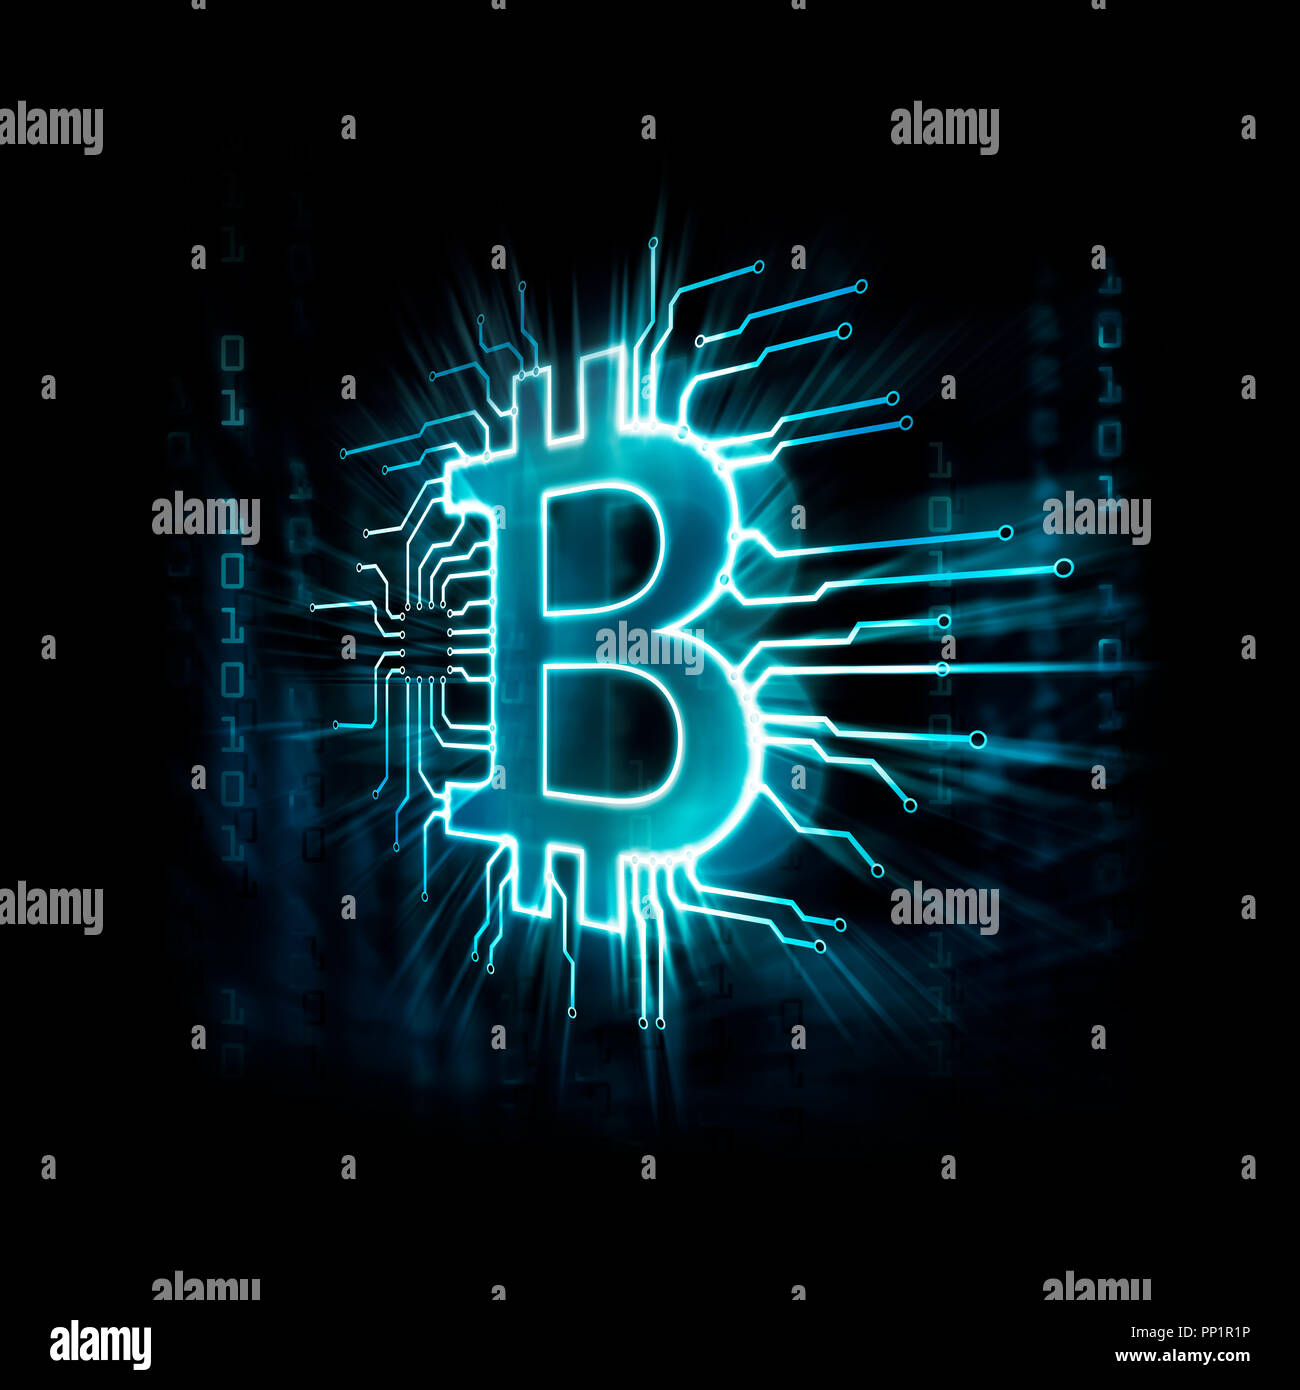 Glowing blue Bitcoin ₿ cryptocurrency, digital decentralized currency symbol, conceptual illustration of a bitcoin logo connected to a blockchain netw Stock Photo